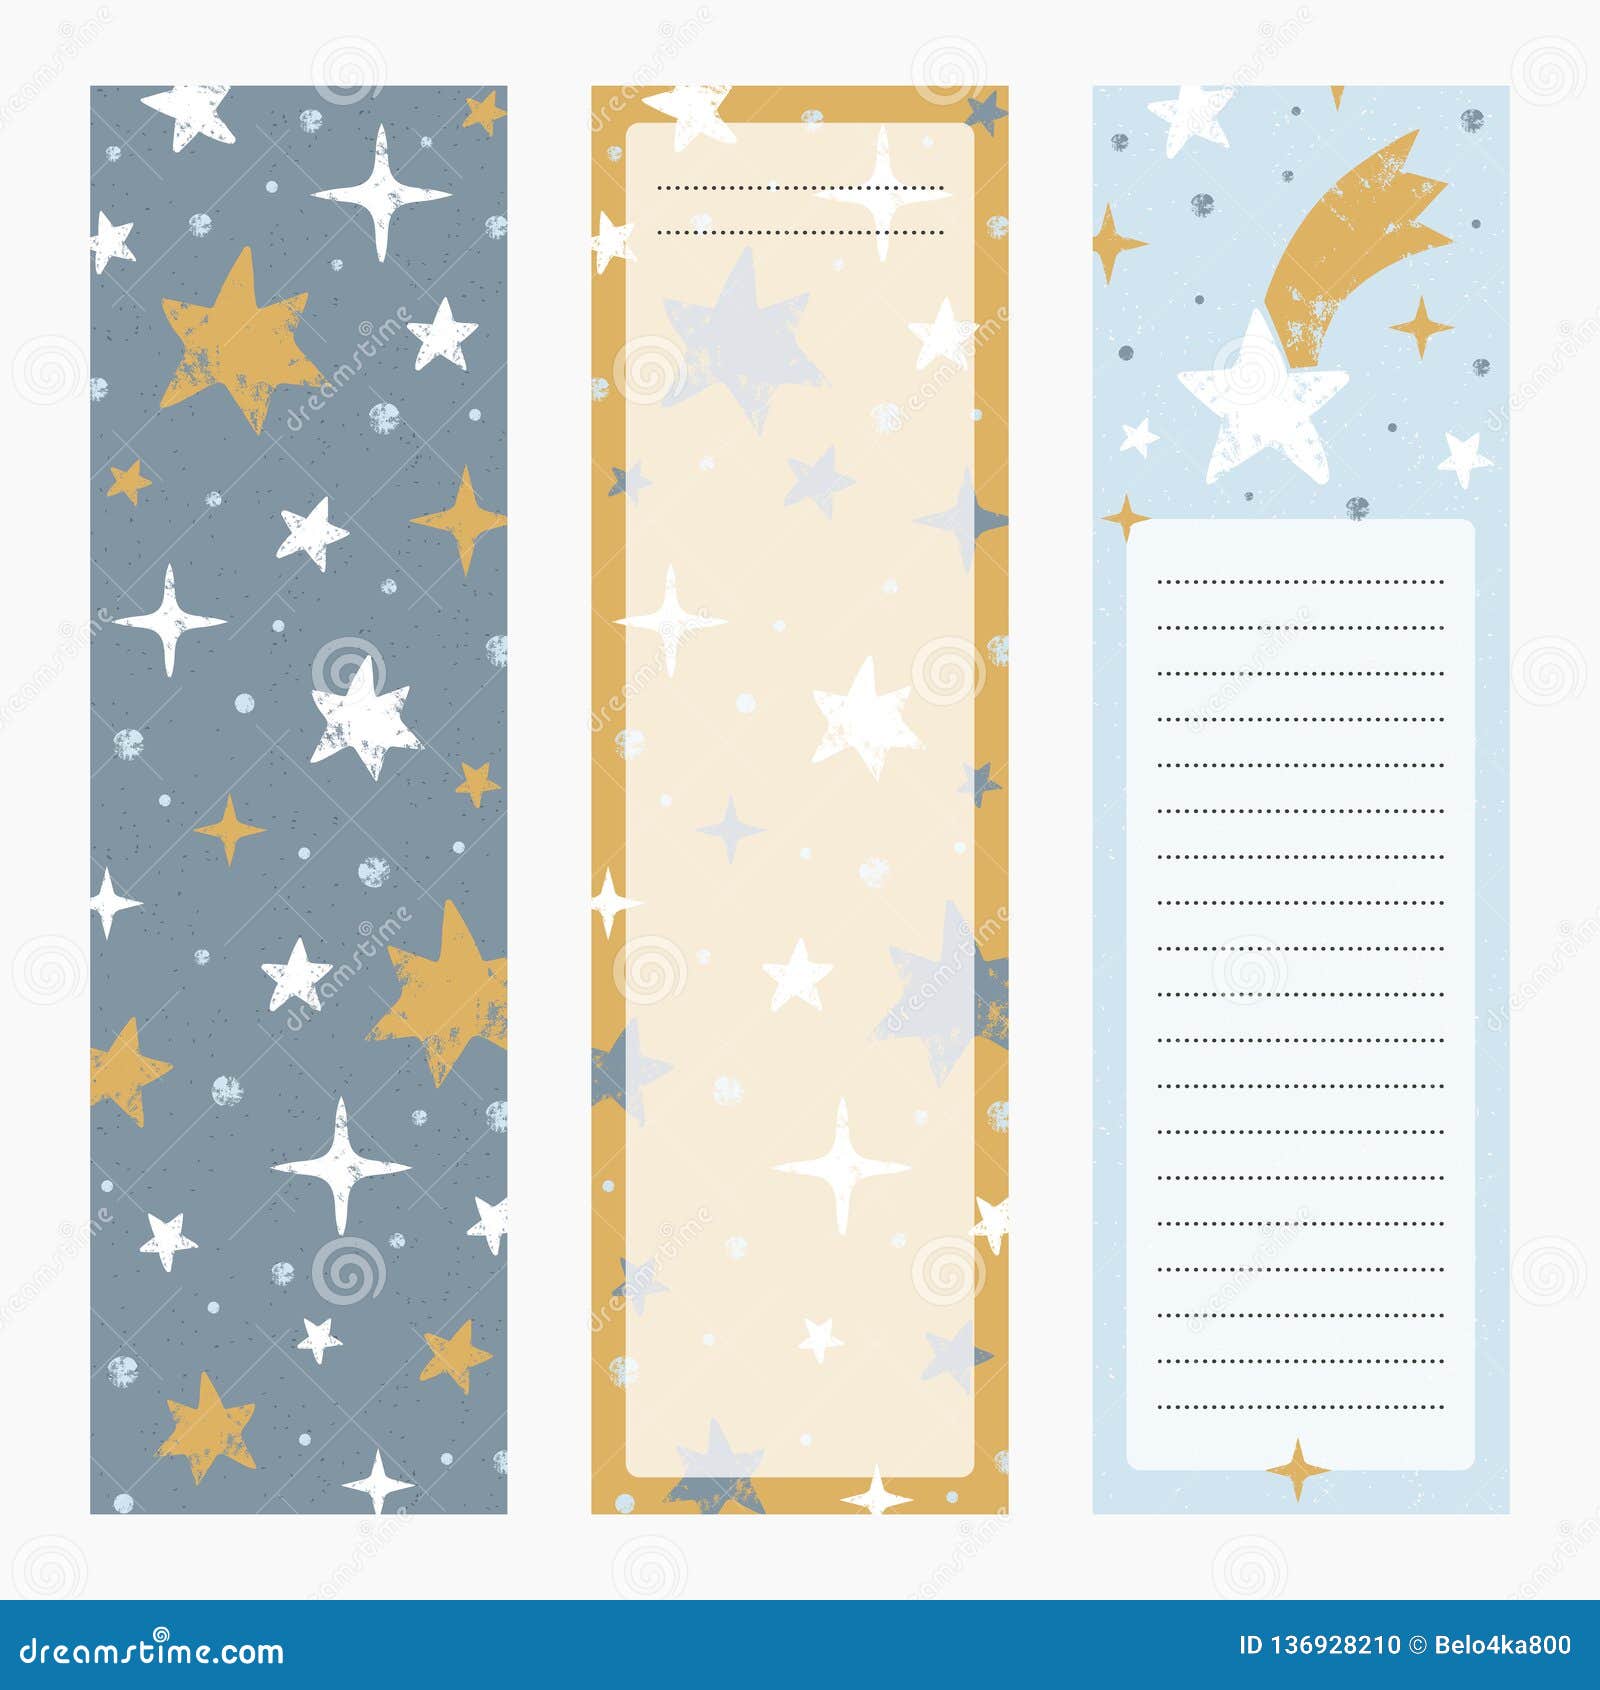 printable bookmarks or banners with little hand drawn stars.